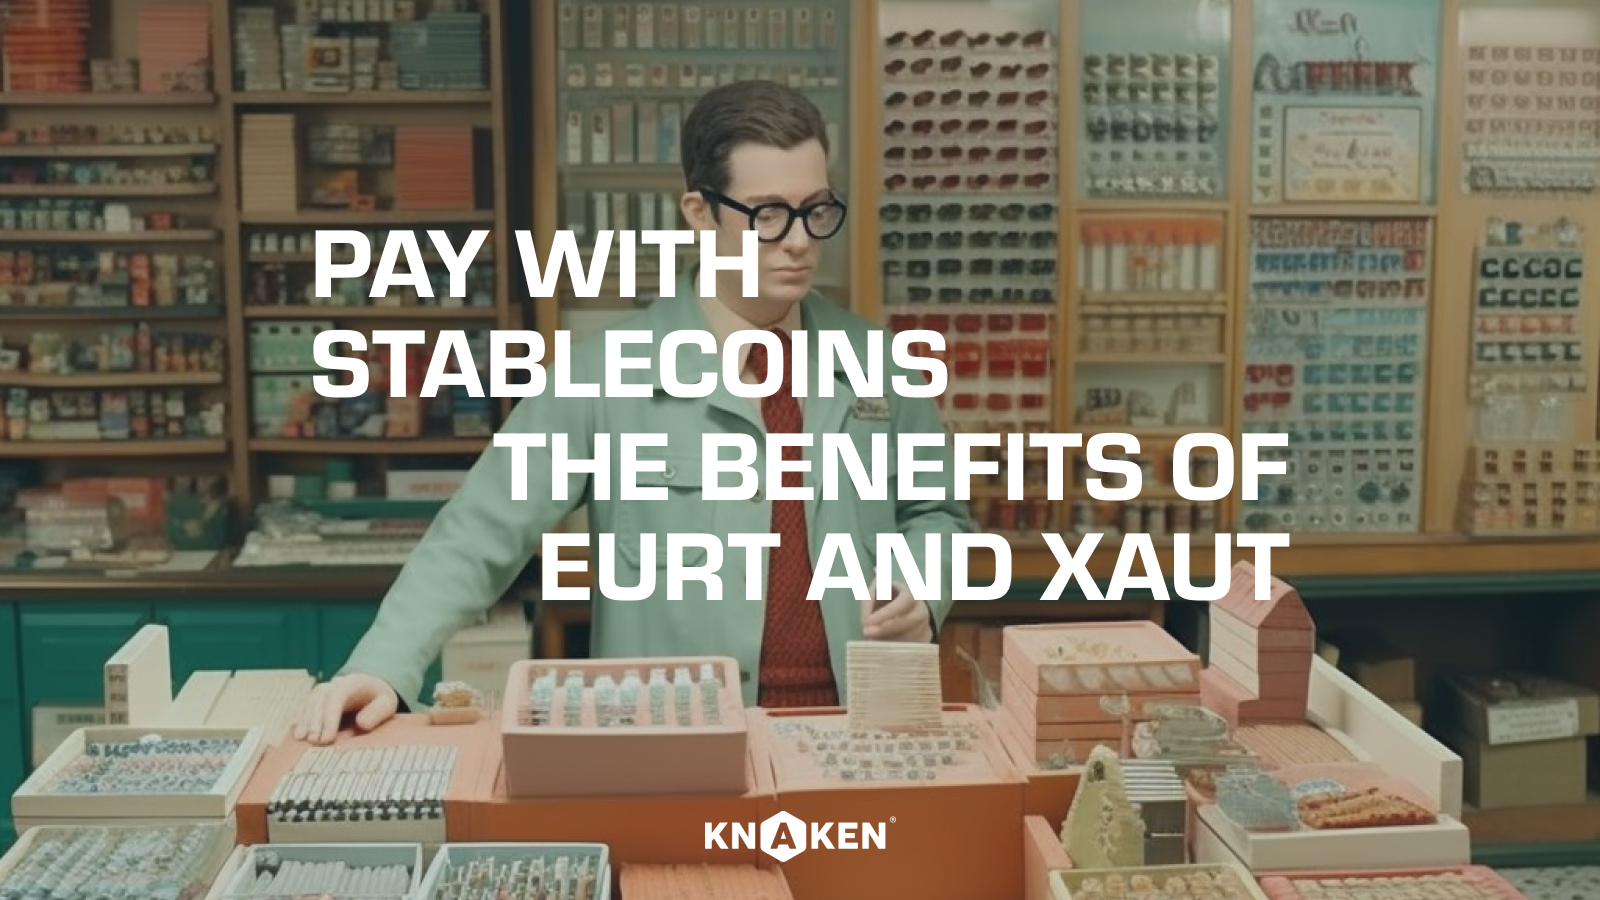 Pay with stablecoins. The benefits of EURT and XAUT